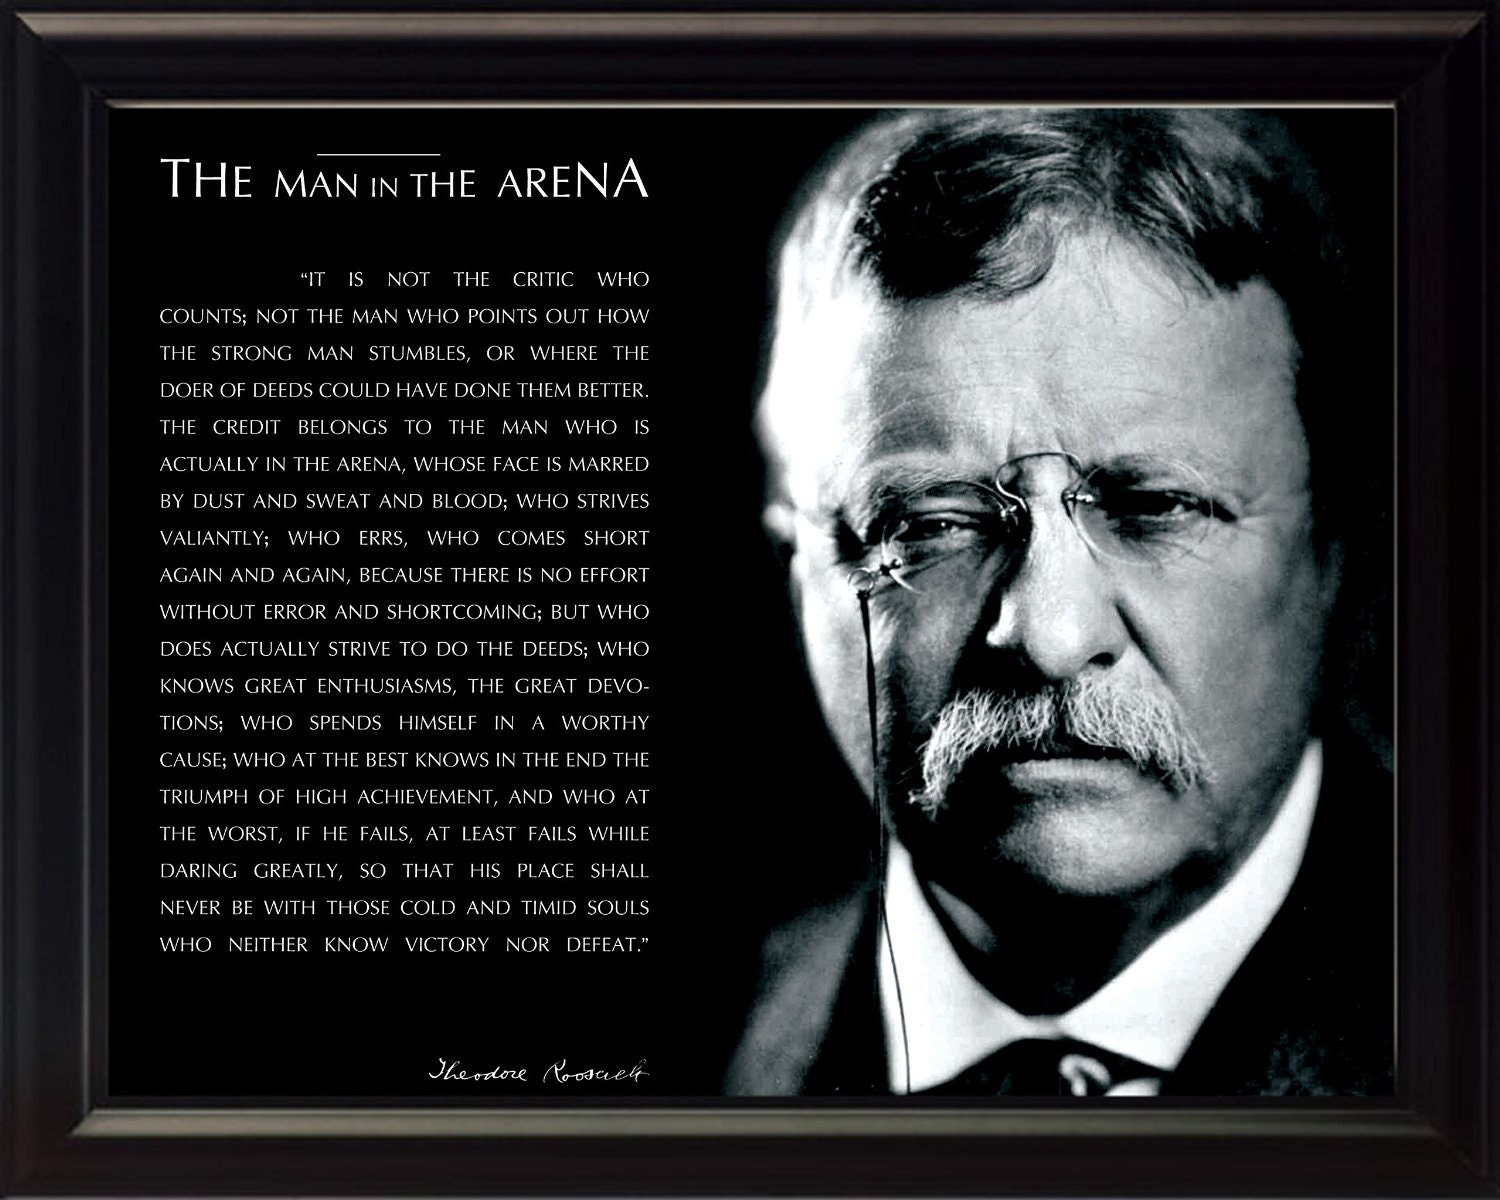 Theodore　Etsy　the　Quote　Arena　Teddy　Roosevelt　in　man　Israel